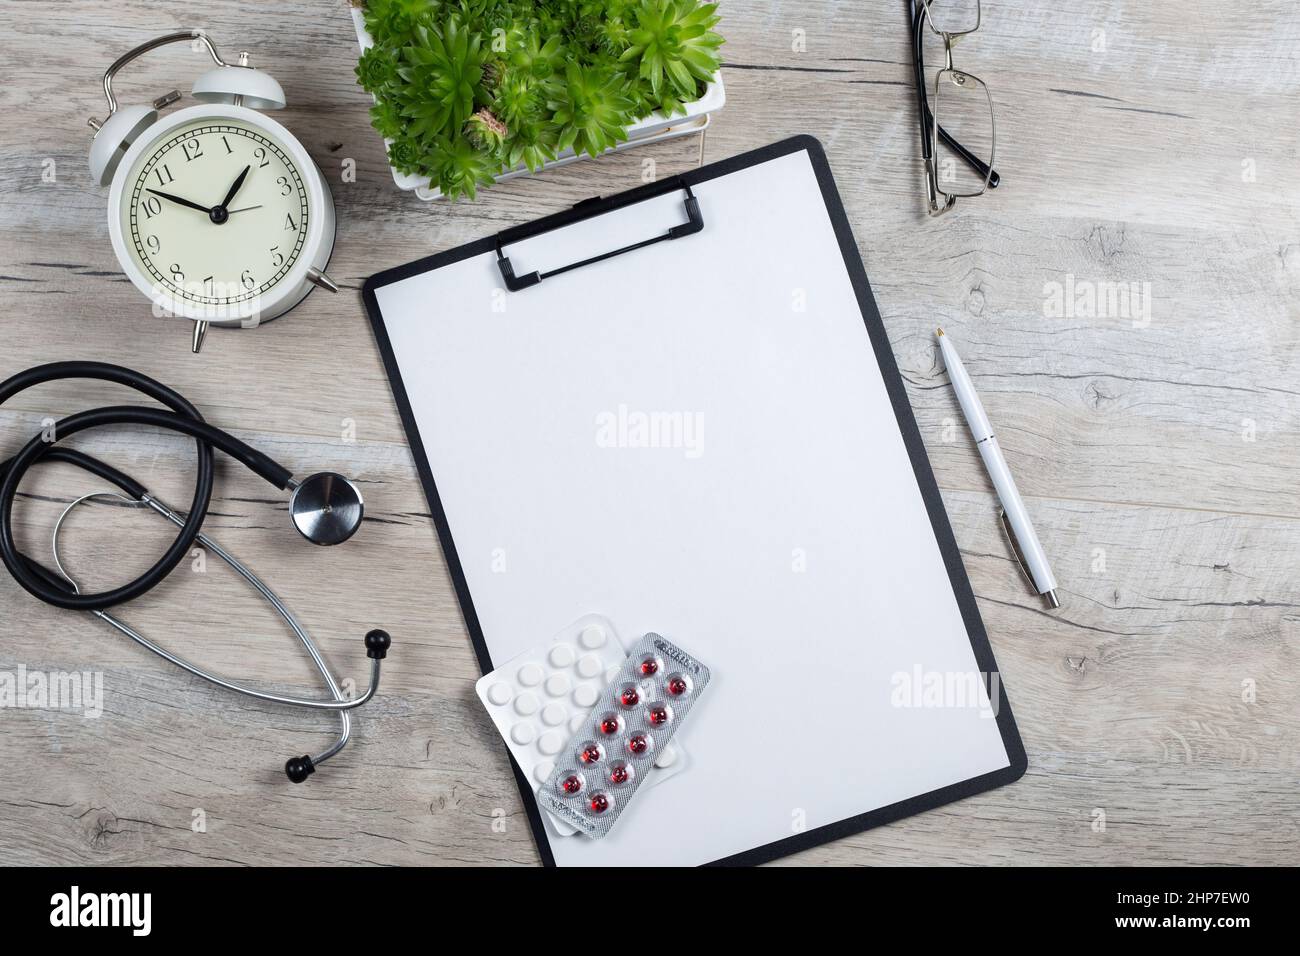 Treatment plan for a patient, doctor's desk top view. Stethoscope, note pad and alarm clock. medical concept Stock Photo